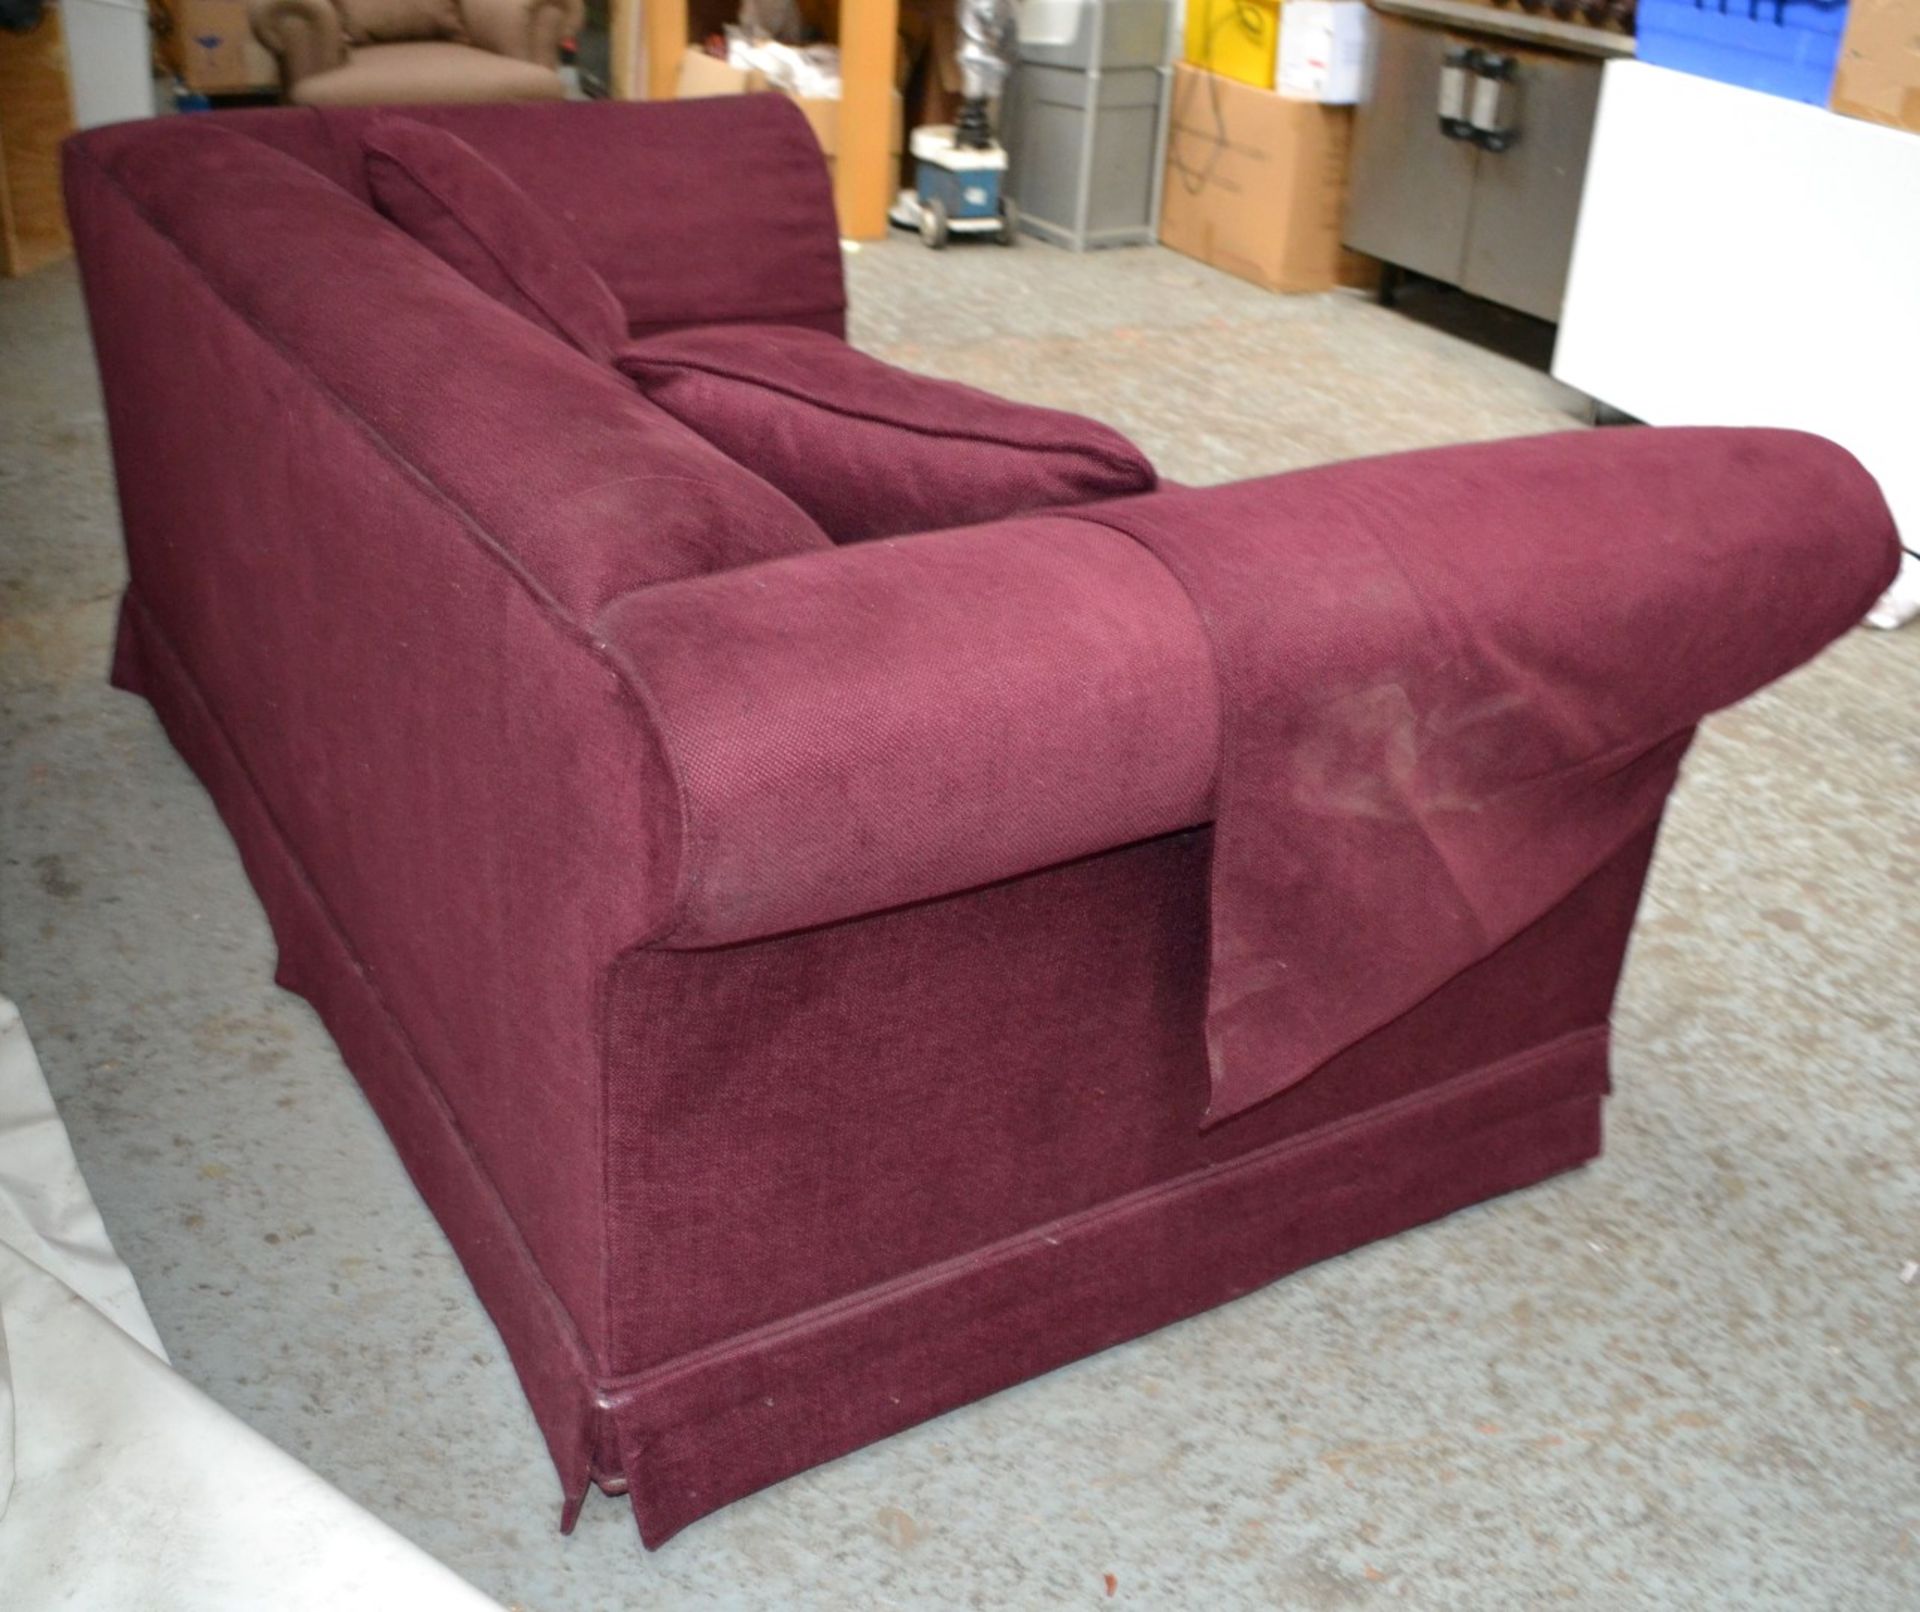 1 x Large Purple Sofa With Arm Covers - CL314 - Location: Altrincham WA14 - *NO VAT On Hammer*<B - Image 8 of 9